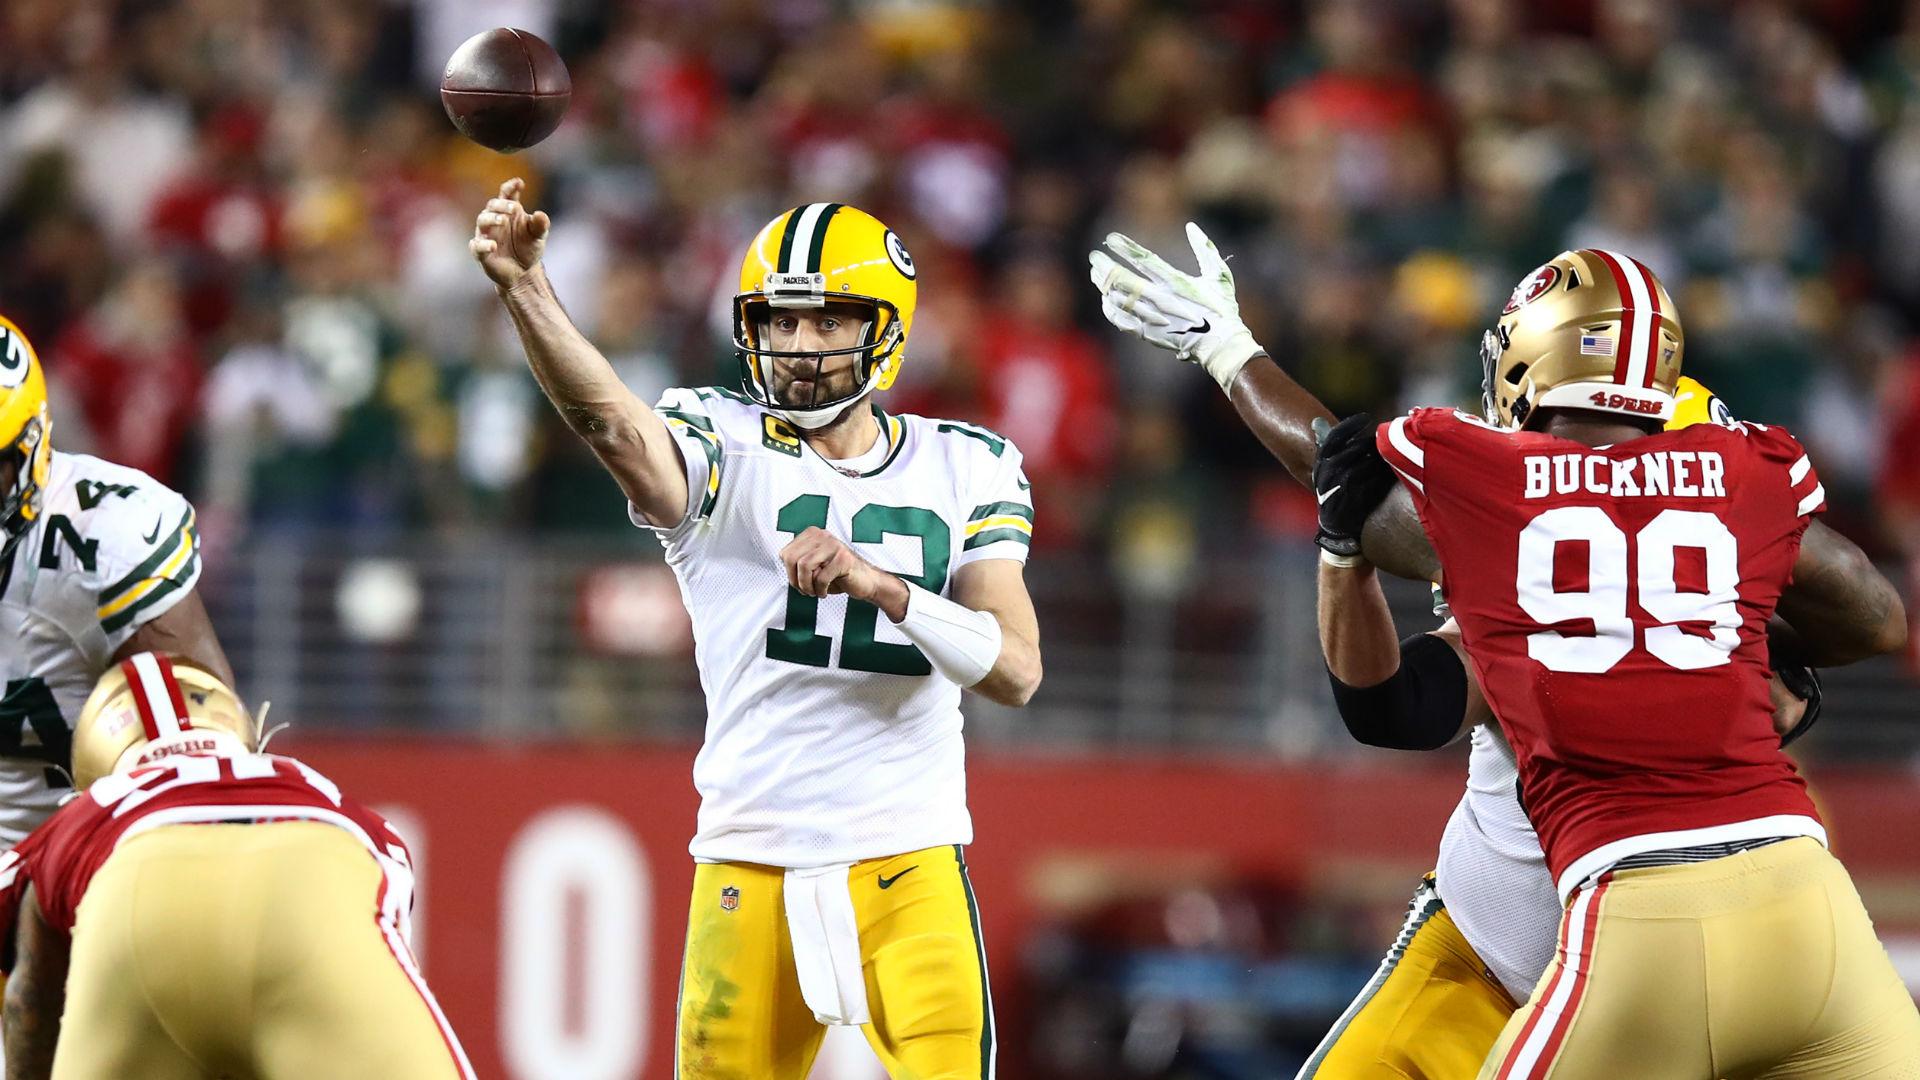 NFL playoff selections, predictions: the Packers stun